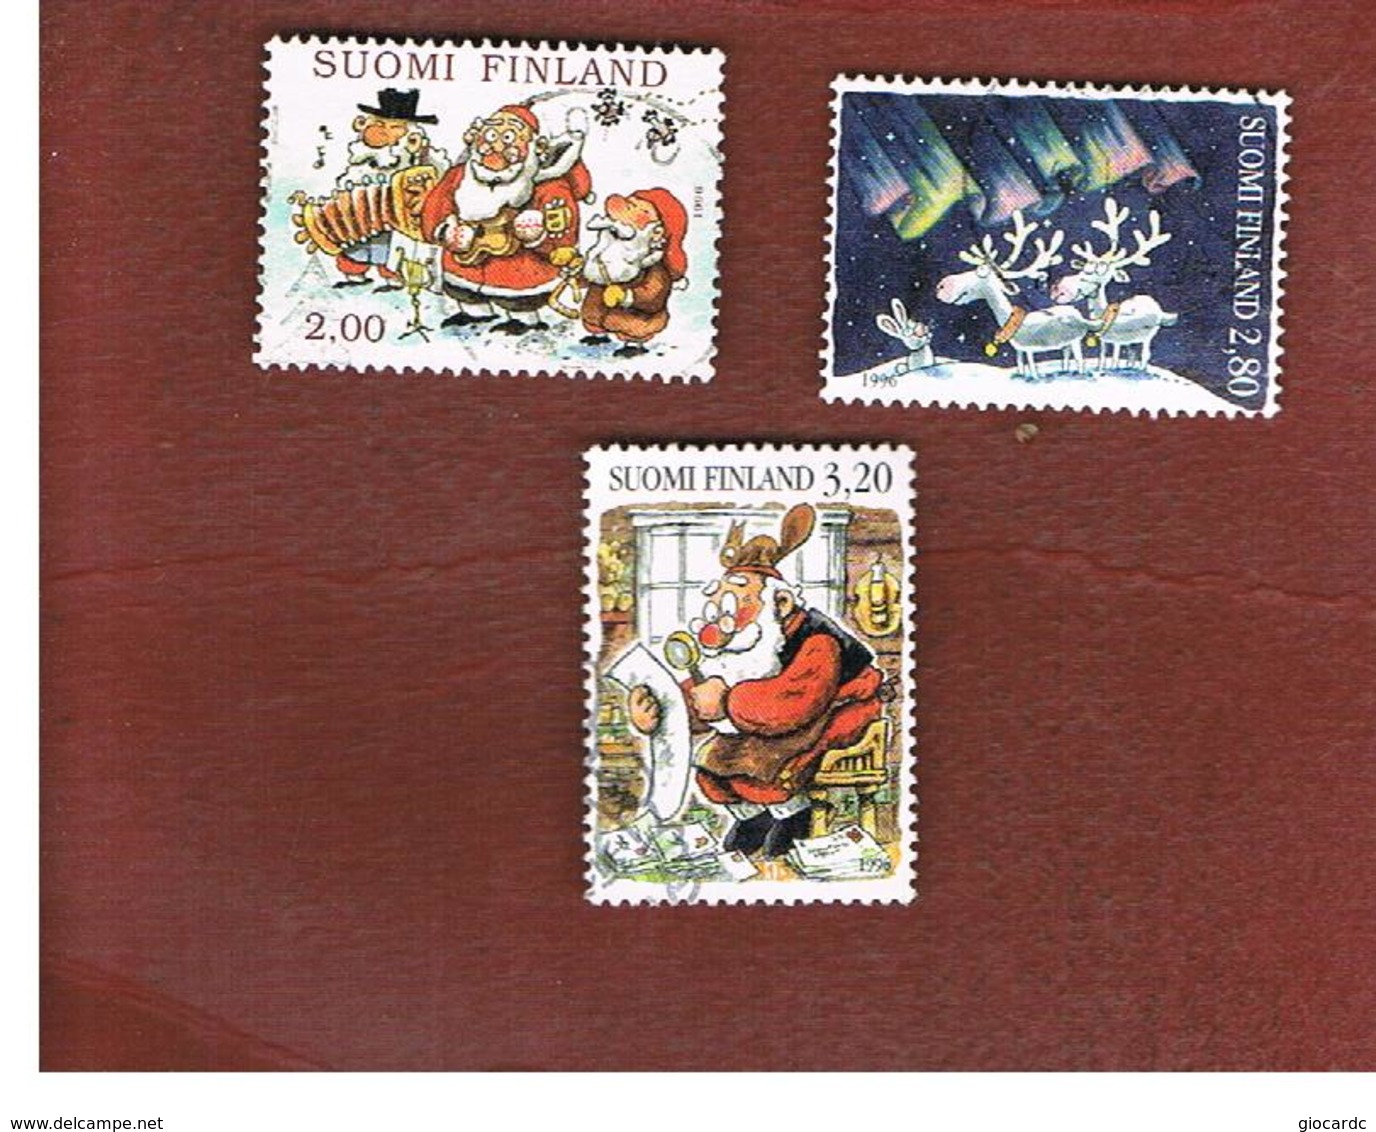 FINLANDIA (FINLAND) -  SG  1453.1455   -    1996  CHRISTMAS (COMPLET SET OF 3)        -         USED ° - Usati